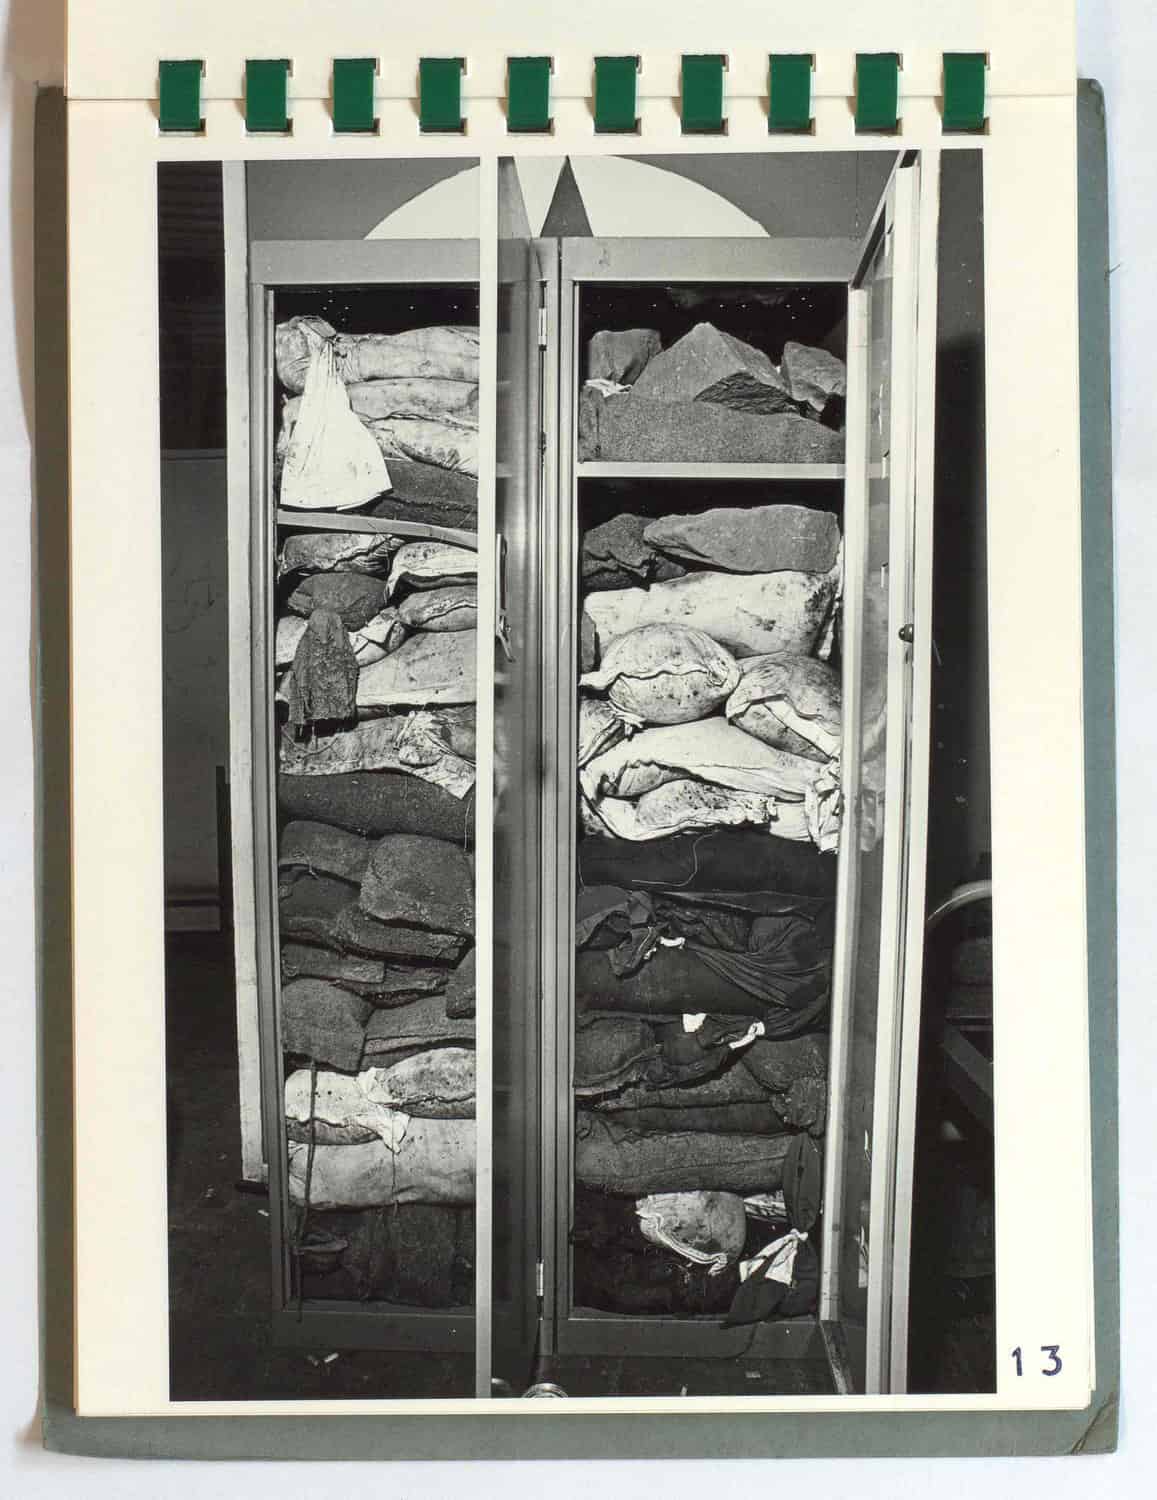 Lockers filled with towels and bedding